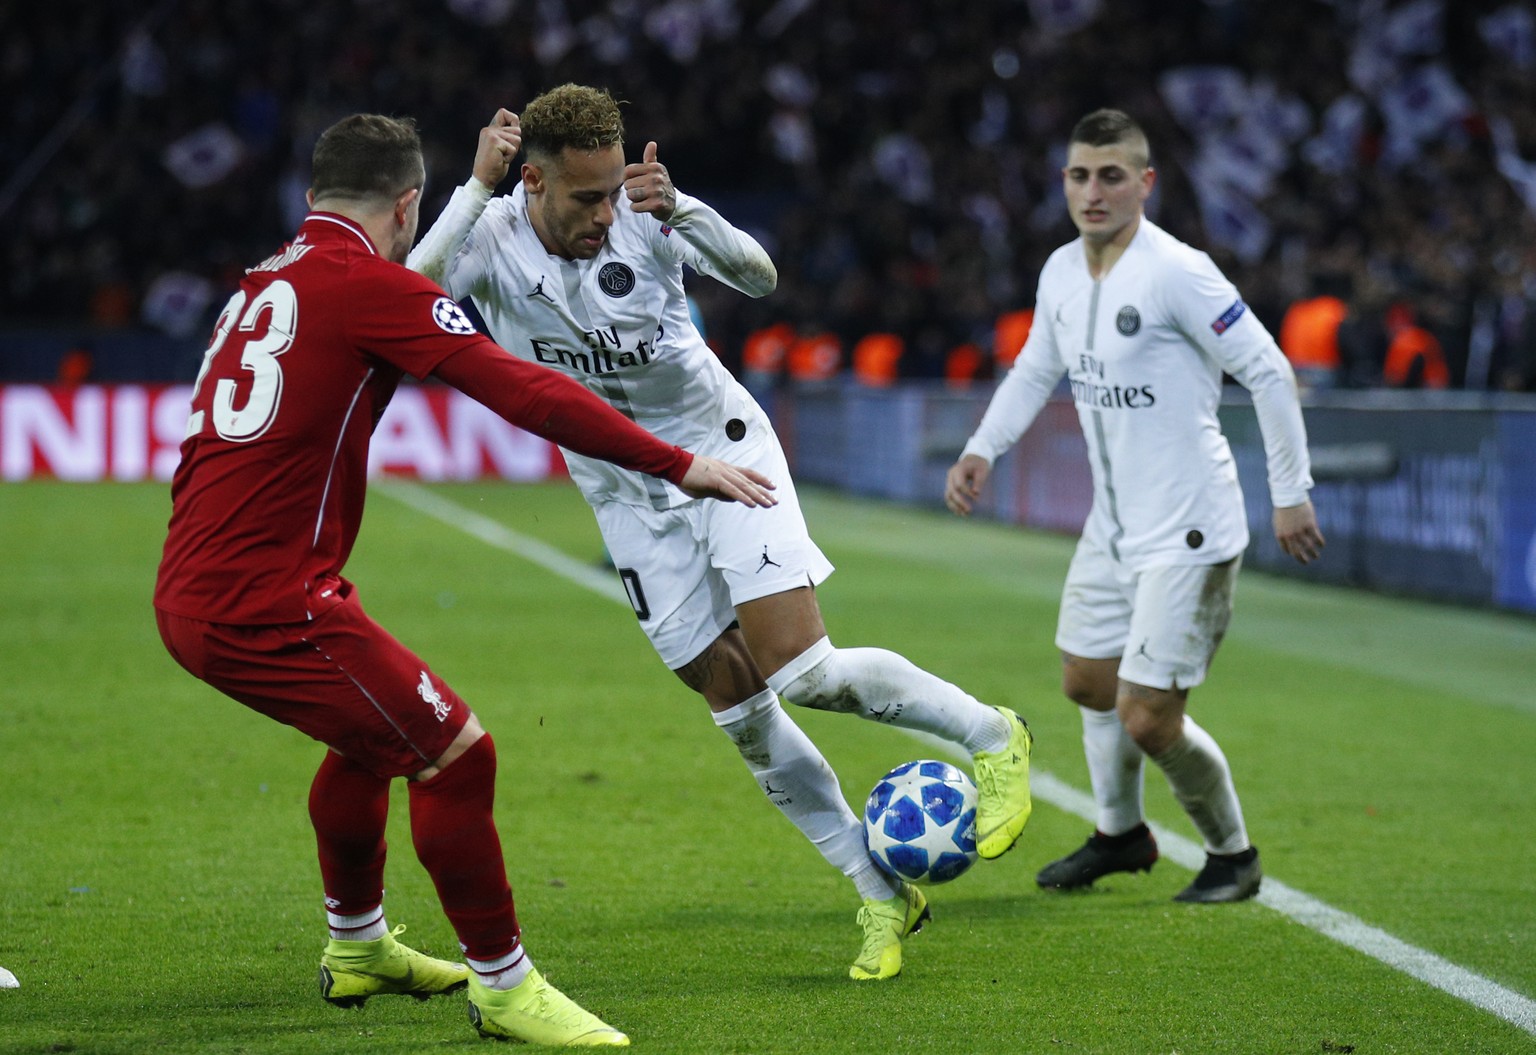 PSG forward Neymar, right, challenges for the ball with Liverpool midfielder Xherdan Shaqiri during a Champions League Group C soccer match between Paris Saint Germain and Liverpool at the Parc des Pr ...